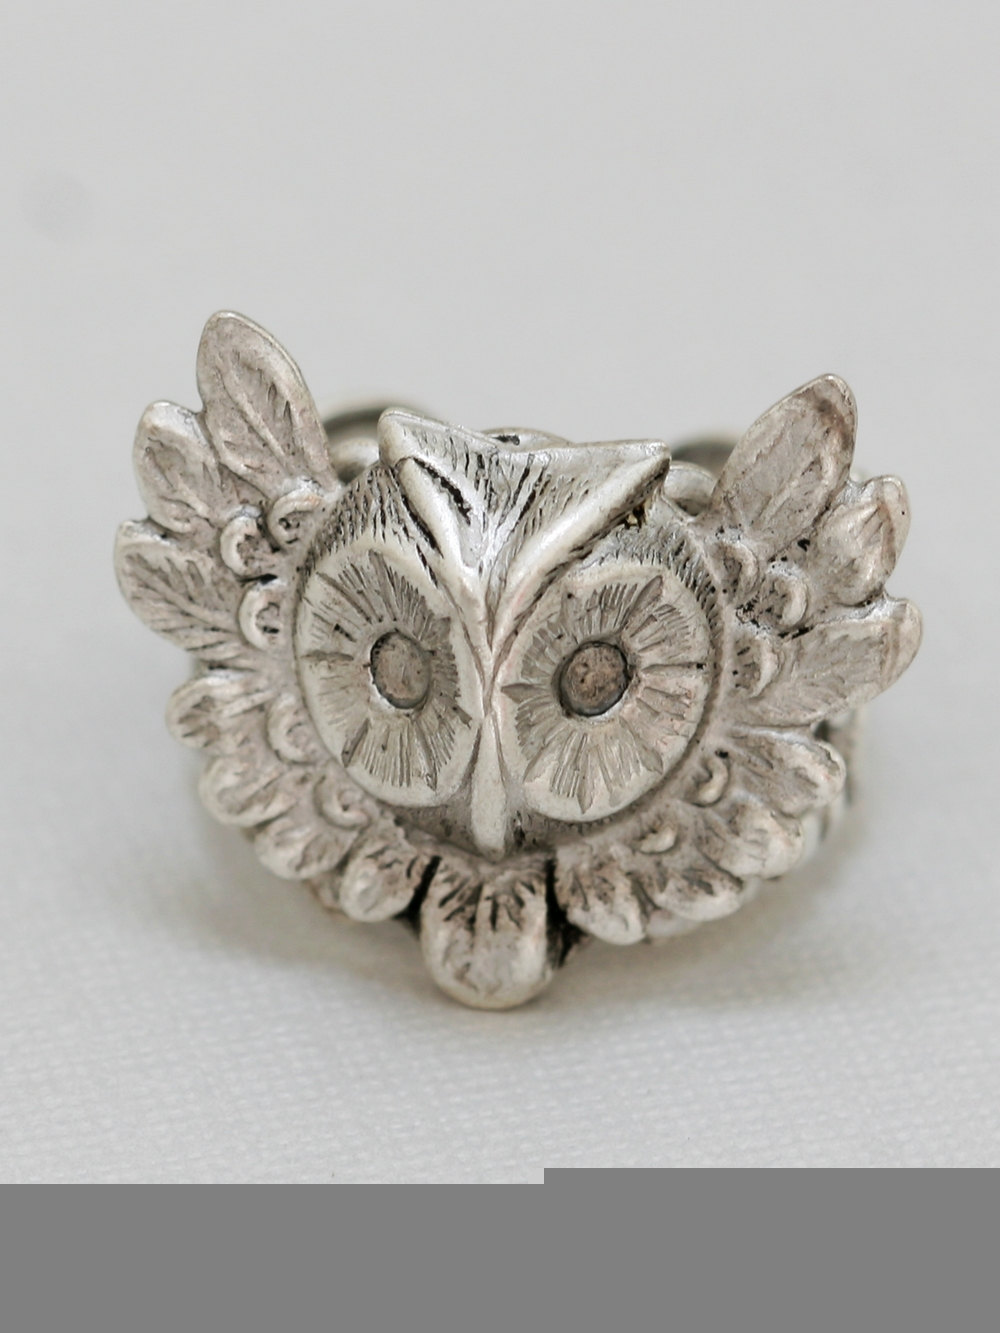 Steampunk Owl Ring, Silver Ring, Adjustable Metal Band, Vintage Inspired Ring steampunk buy now online